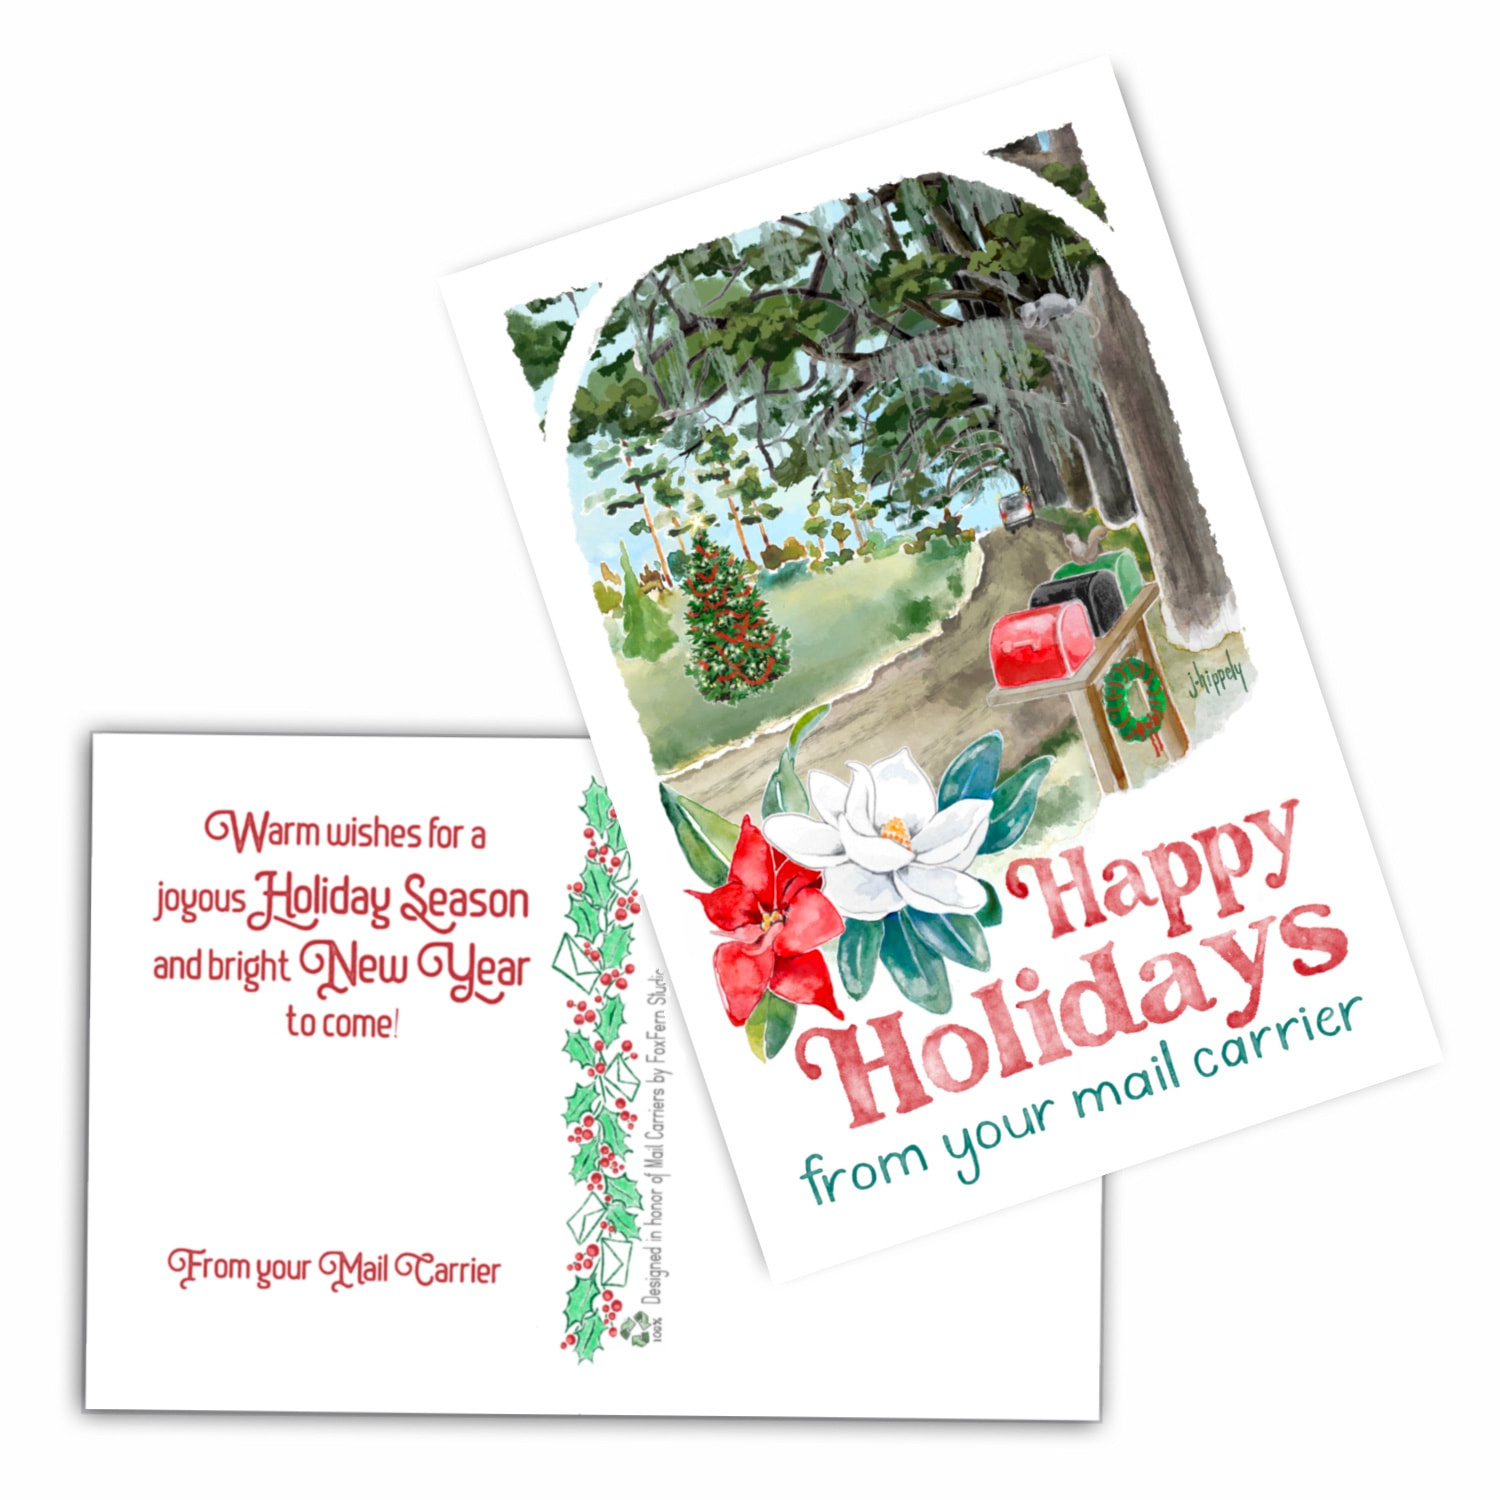 Christmas in the South - Holiday Postcards for Southern Region Mail  Carriers - Postal Greetings 4”x6”